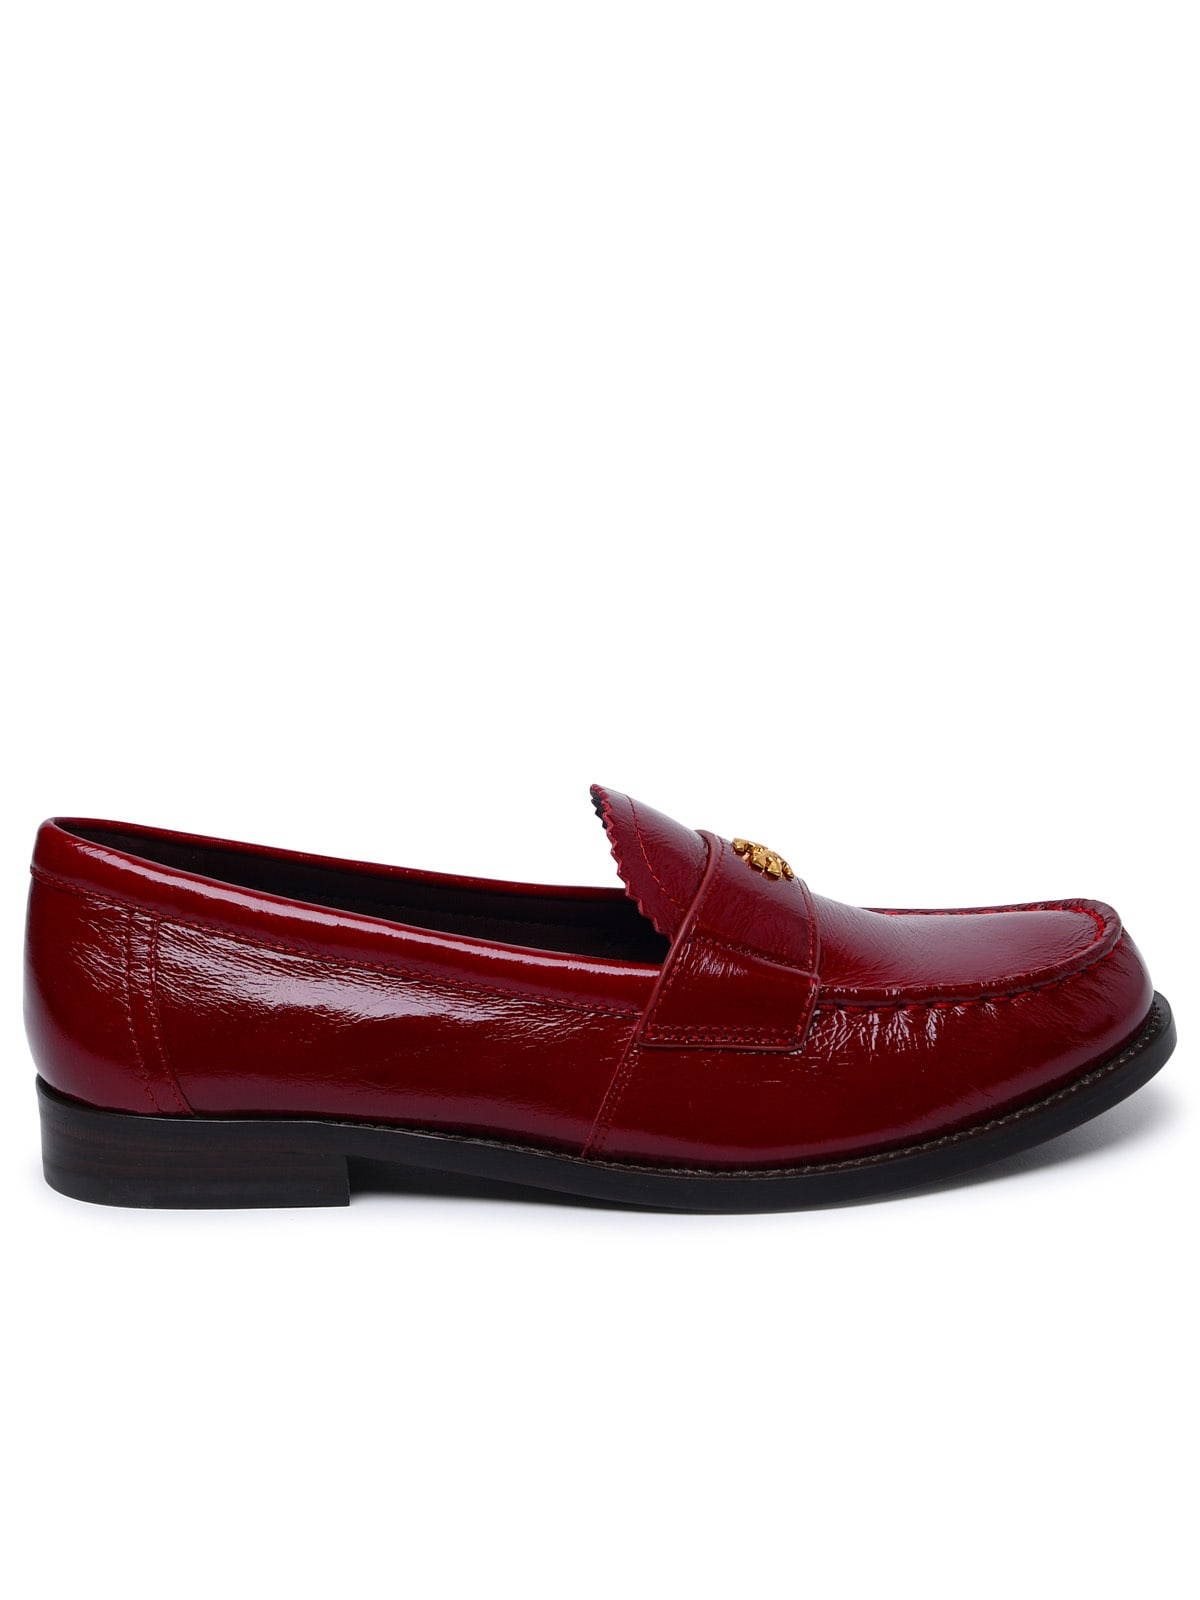 Tory Burch Perry Red Shiny Ruffled Leather Loafers